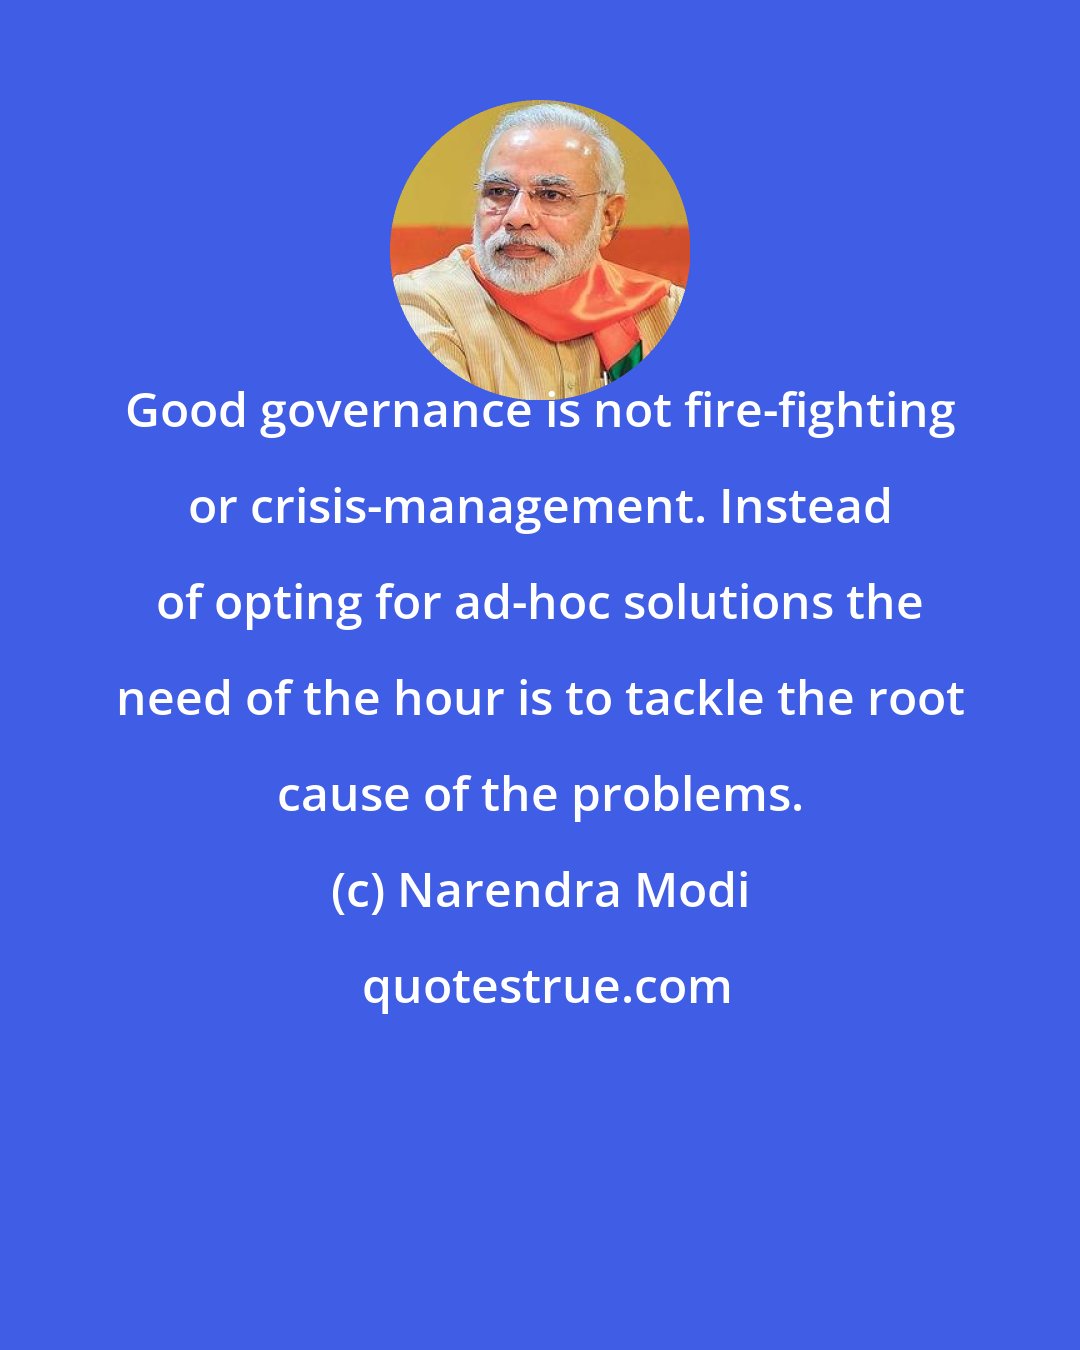 Narendra Modi: Good governance is not fire-fighting or crisis-management. Instead of opting for ad-hoc solutions the need of the hour is to tackle the root cause of the problems.